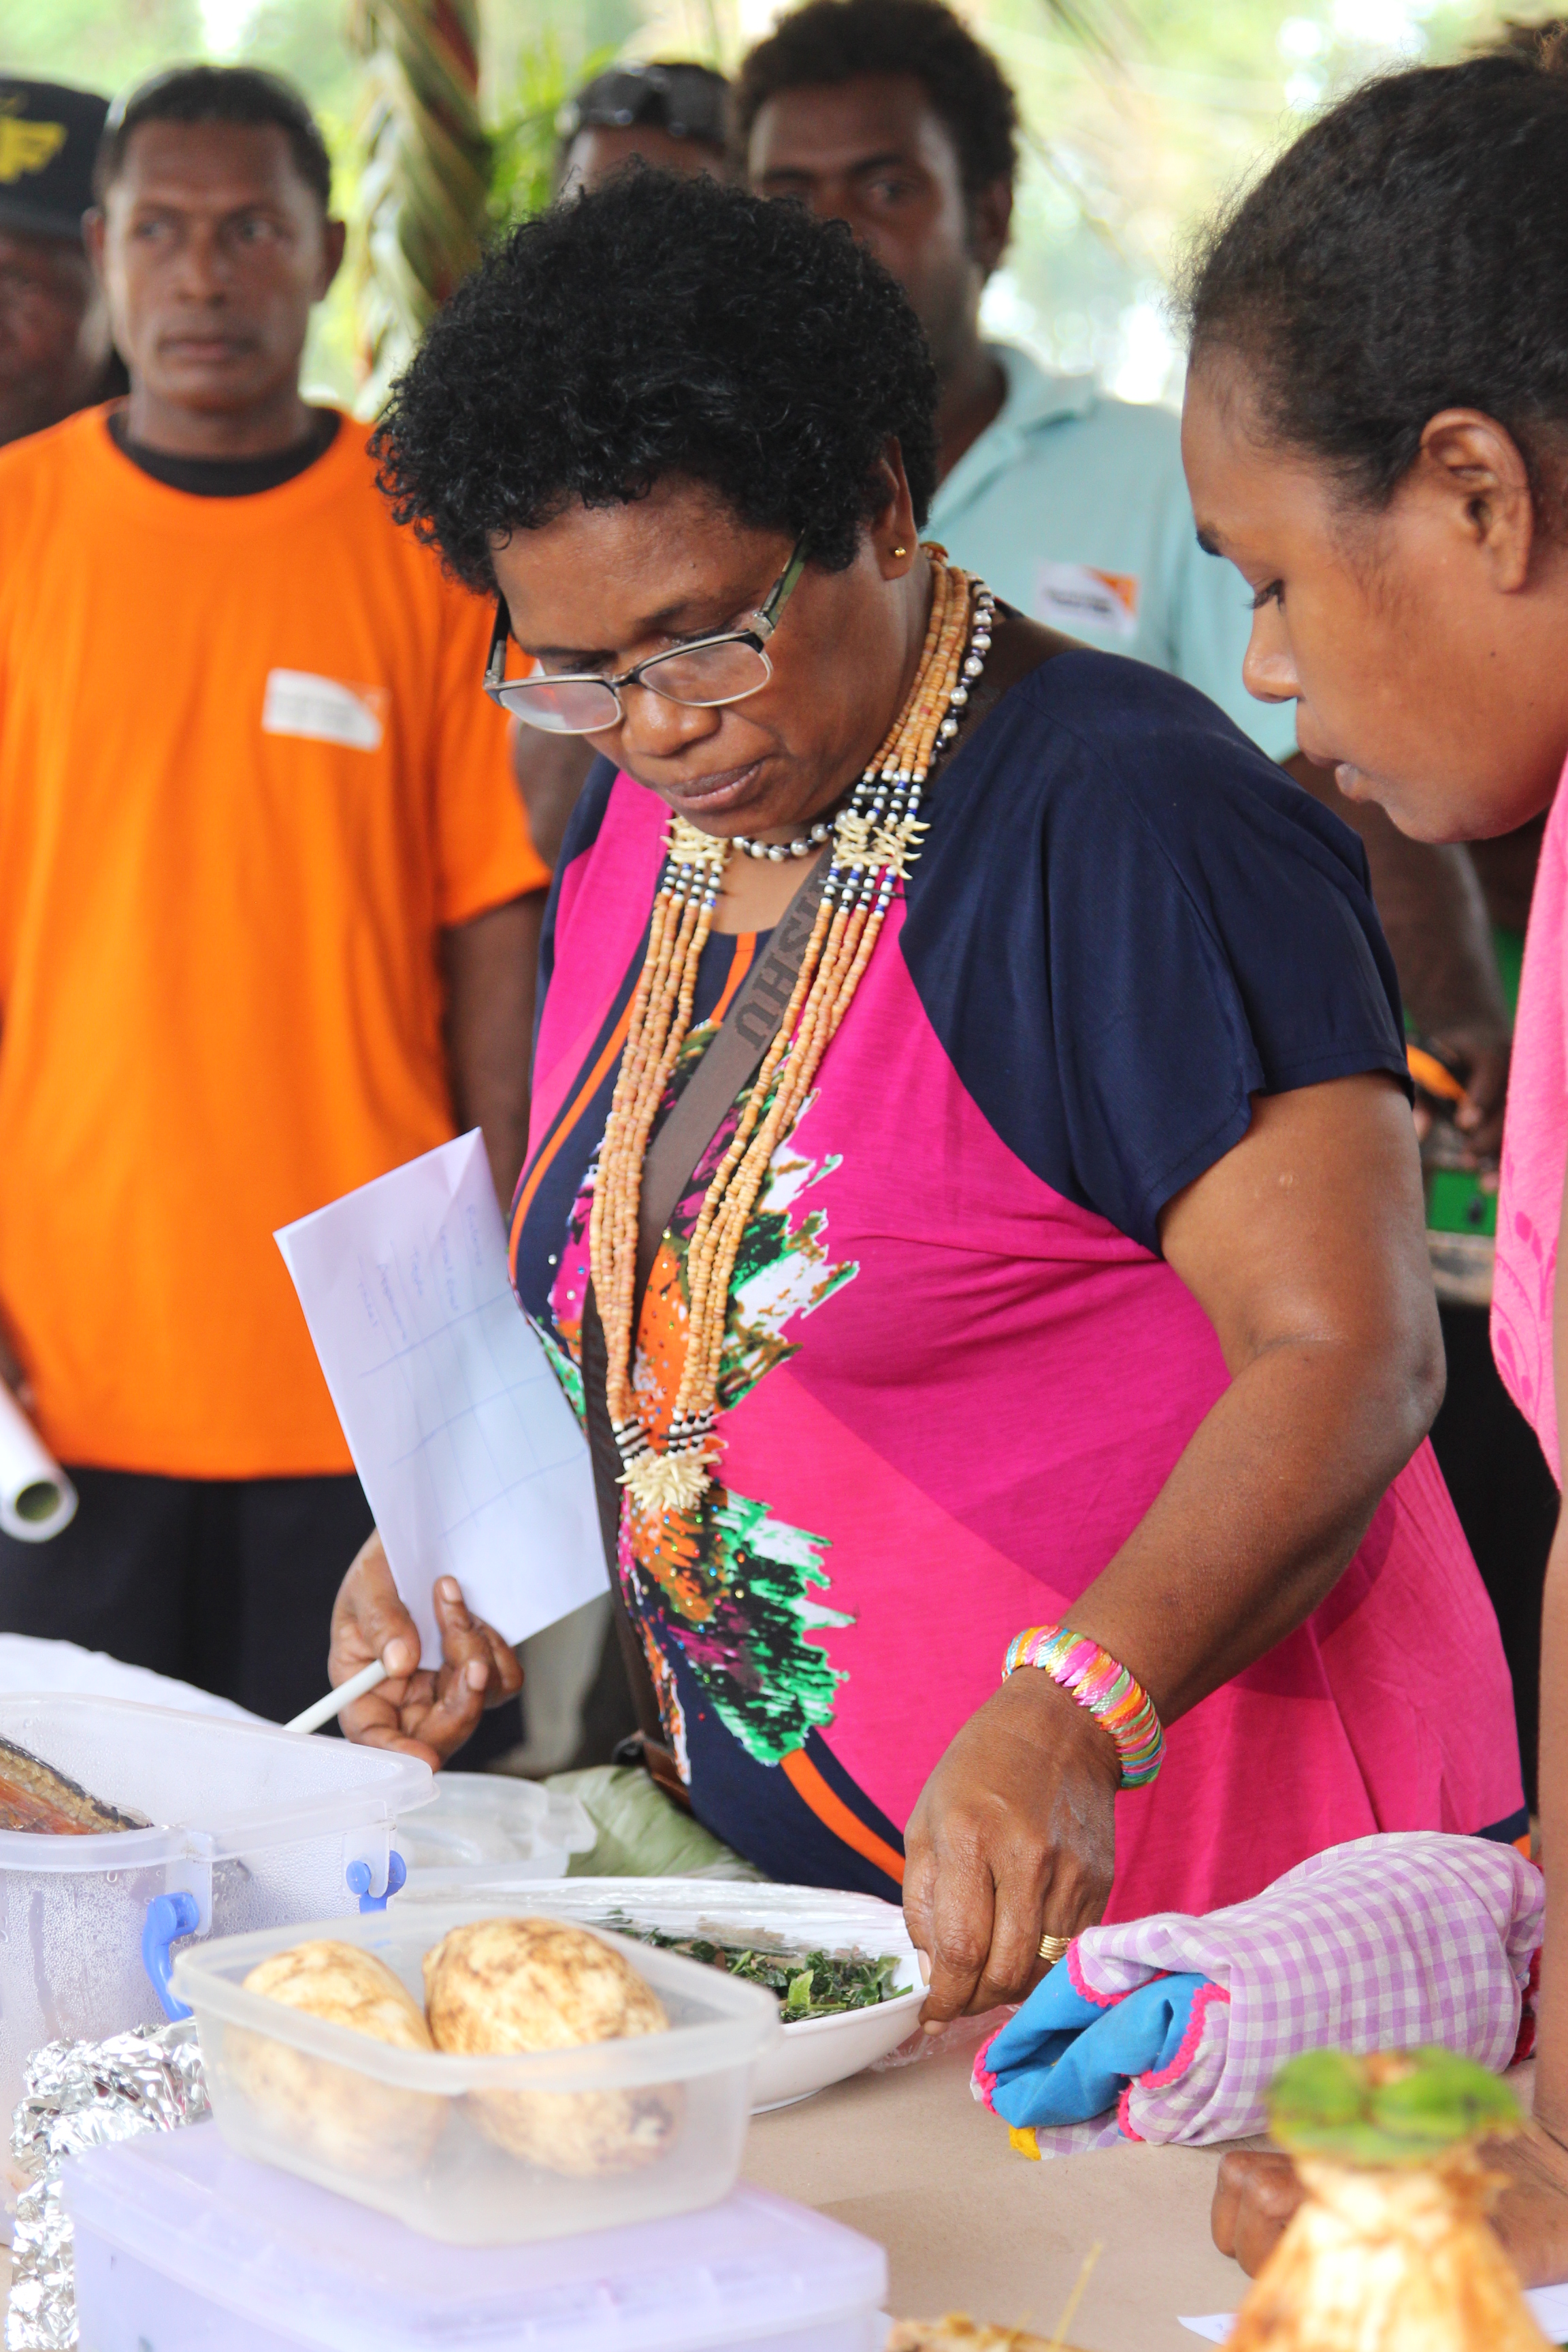 NCD National Coordinator, Nevalyn Leve, and Nutrition Officer, Arimer Hasi, inspect the meals brought to the cooking competition.